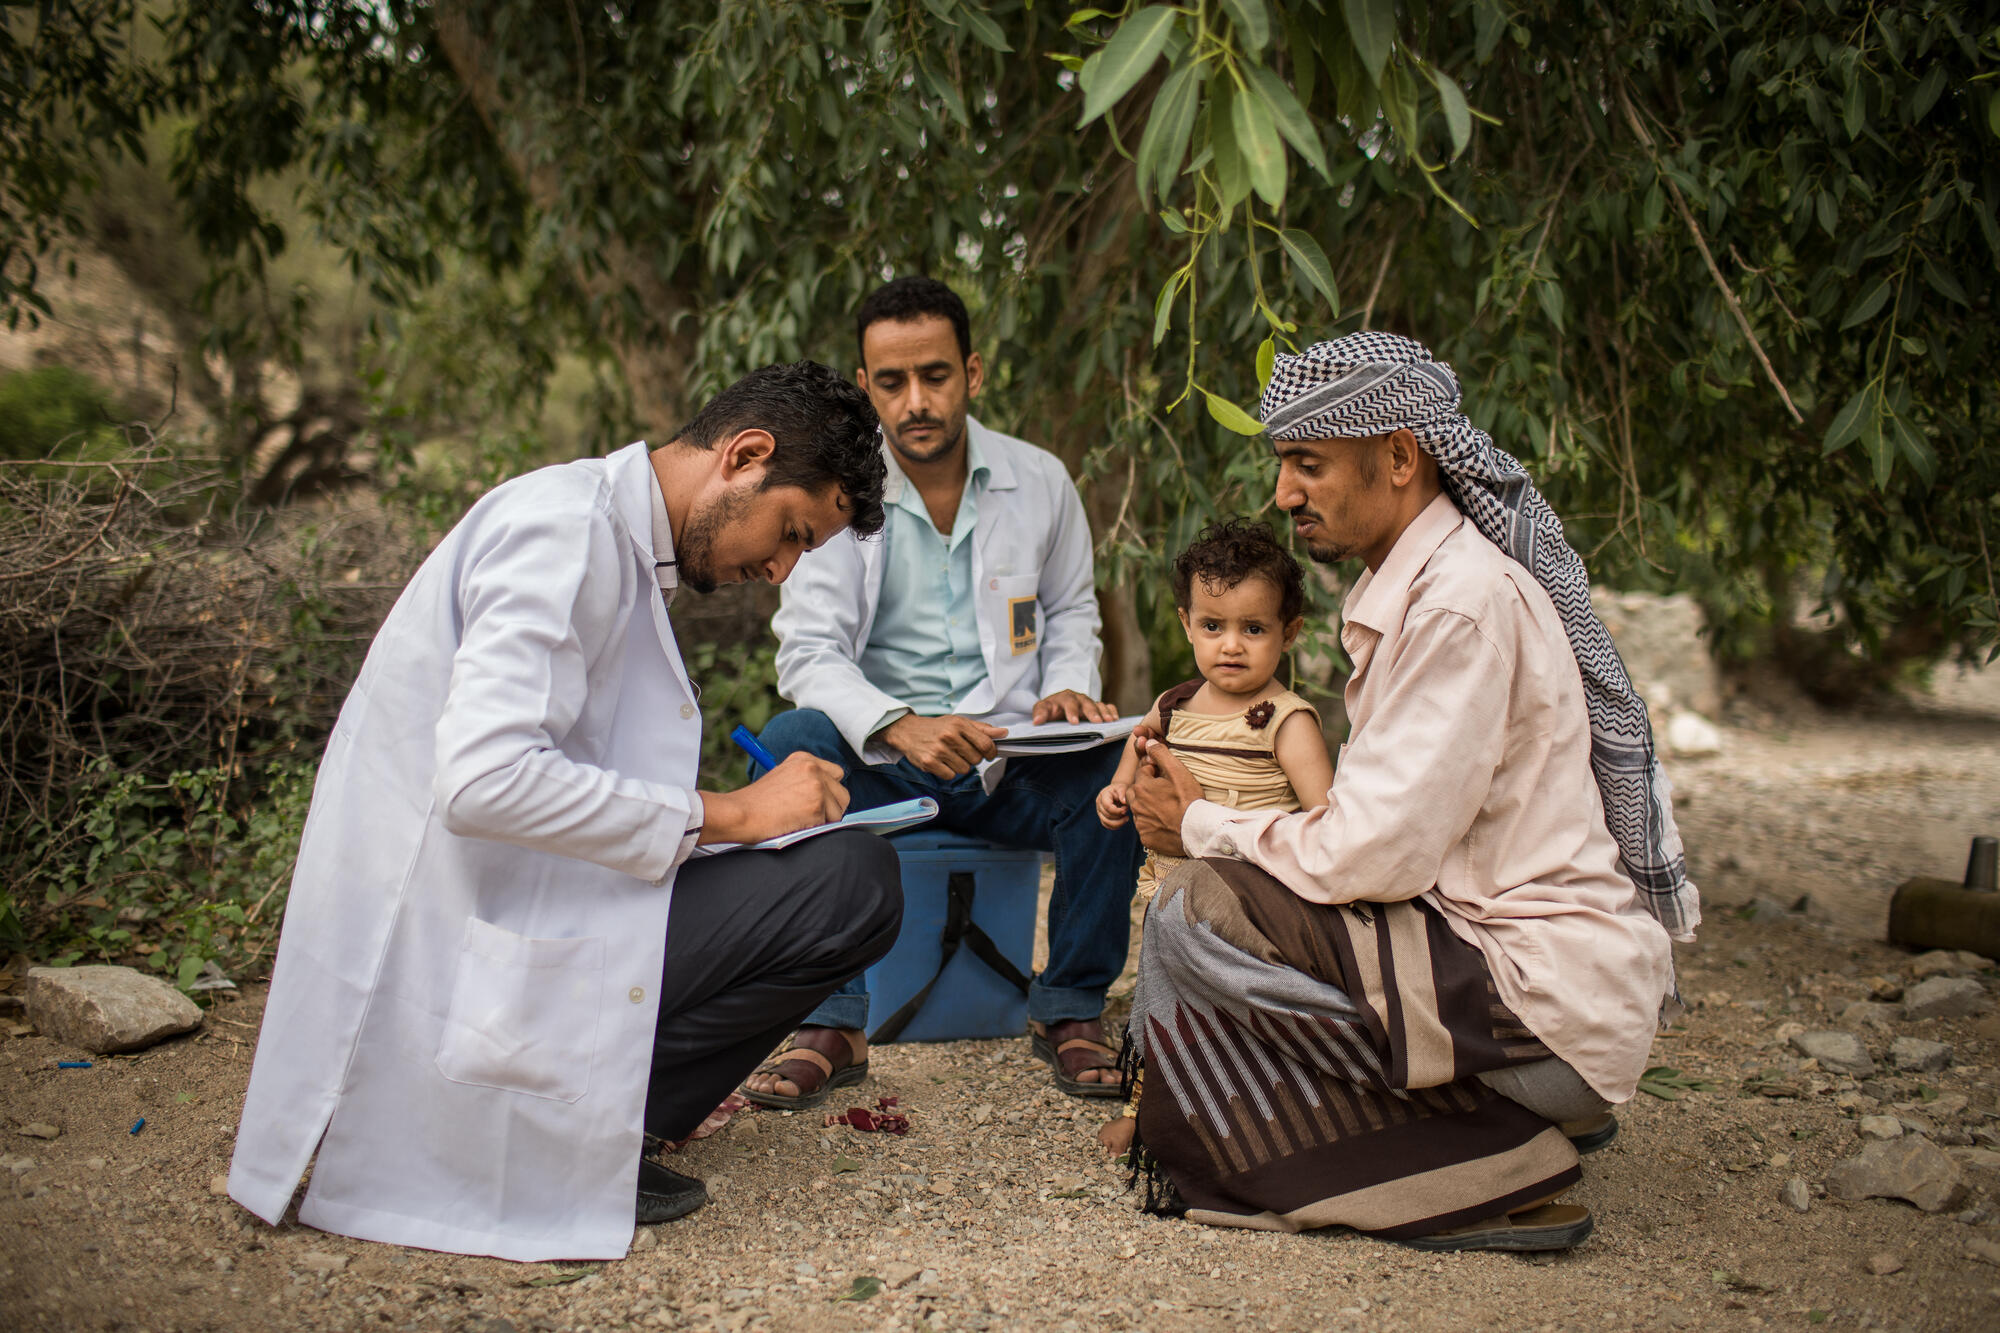 IRC health workers examine a child being held by his father in the village of Mosuk, Yemen